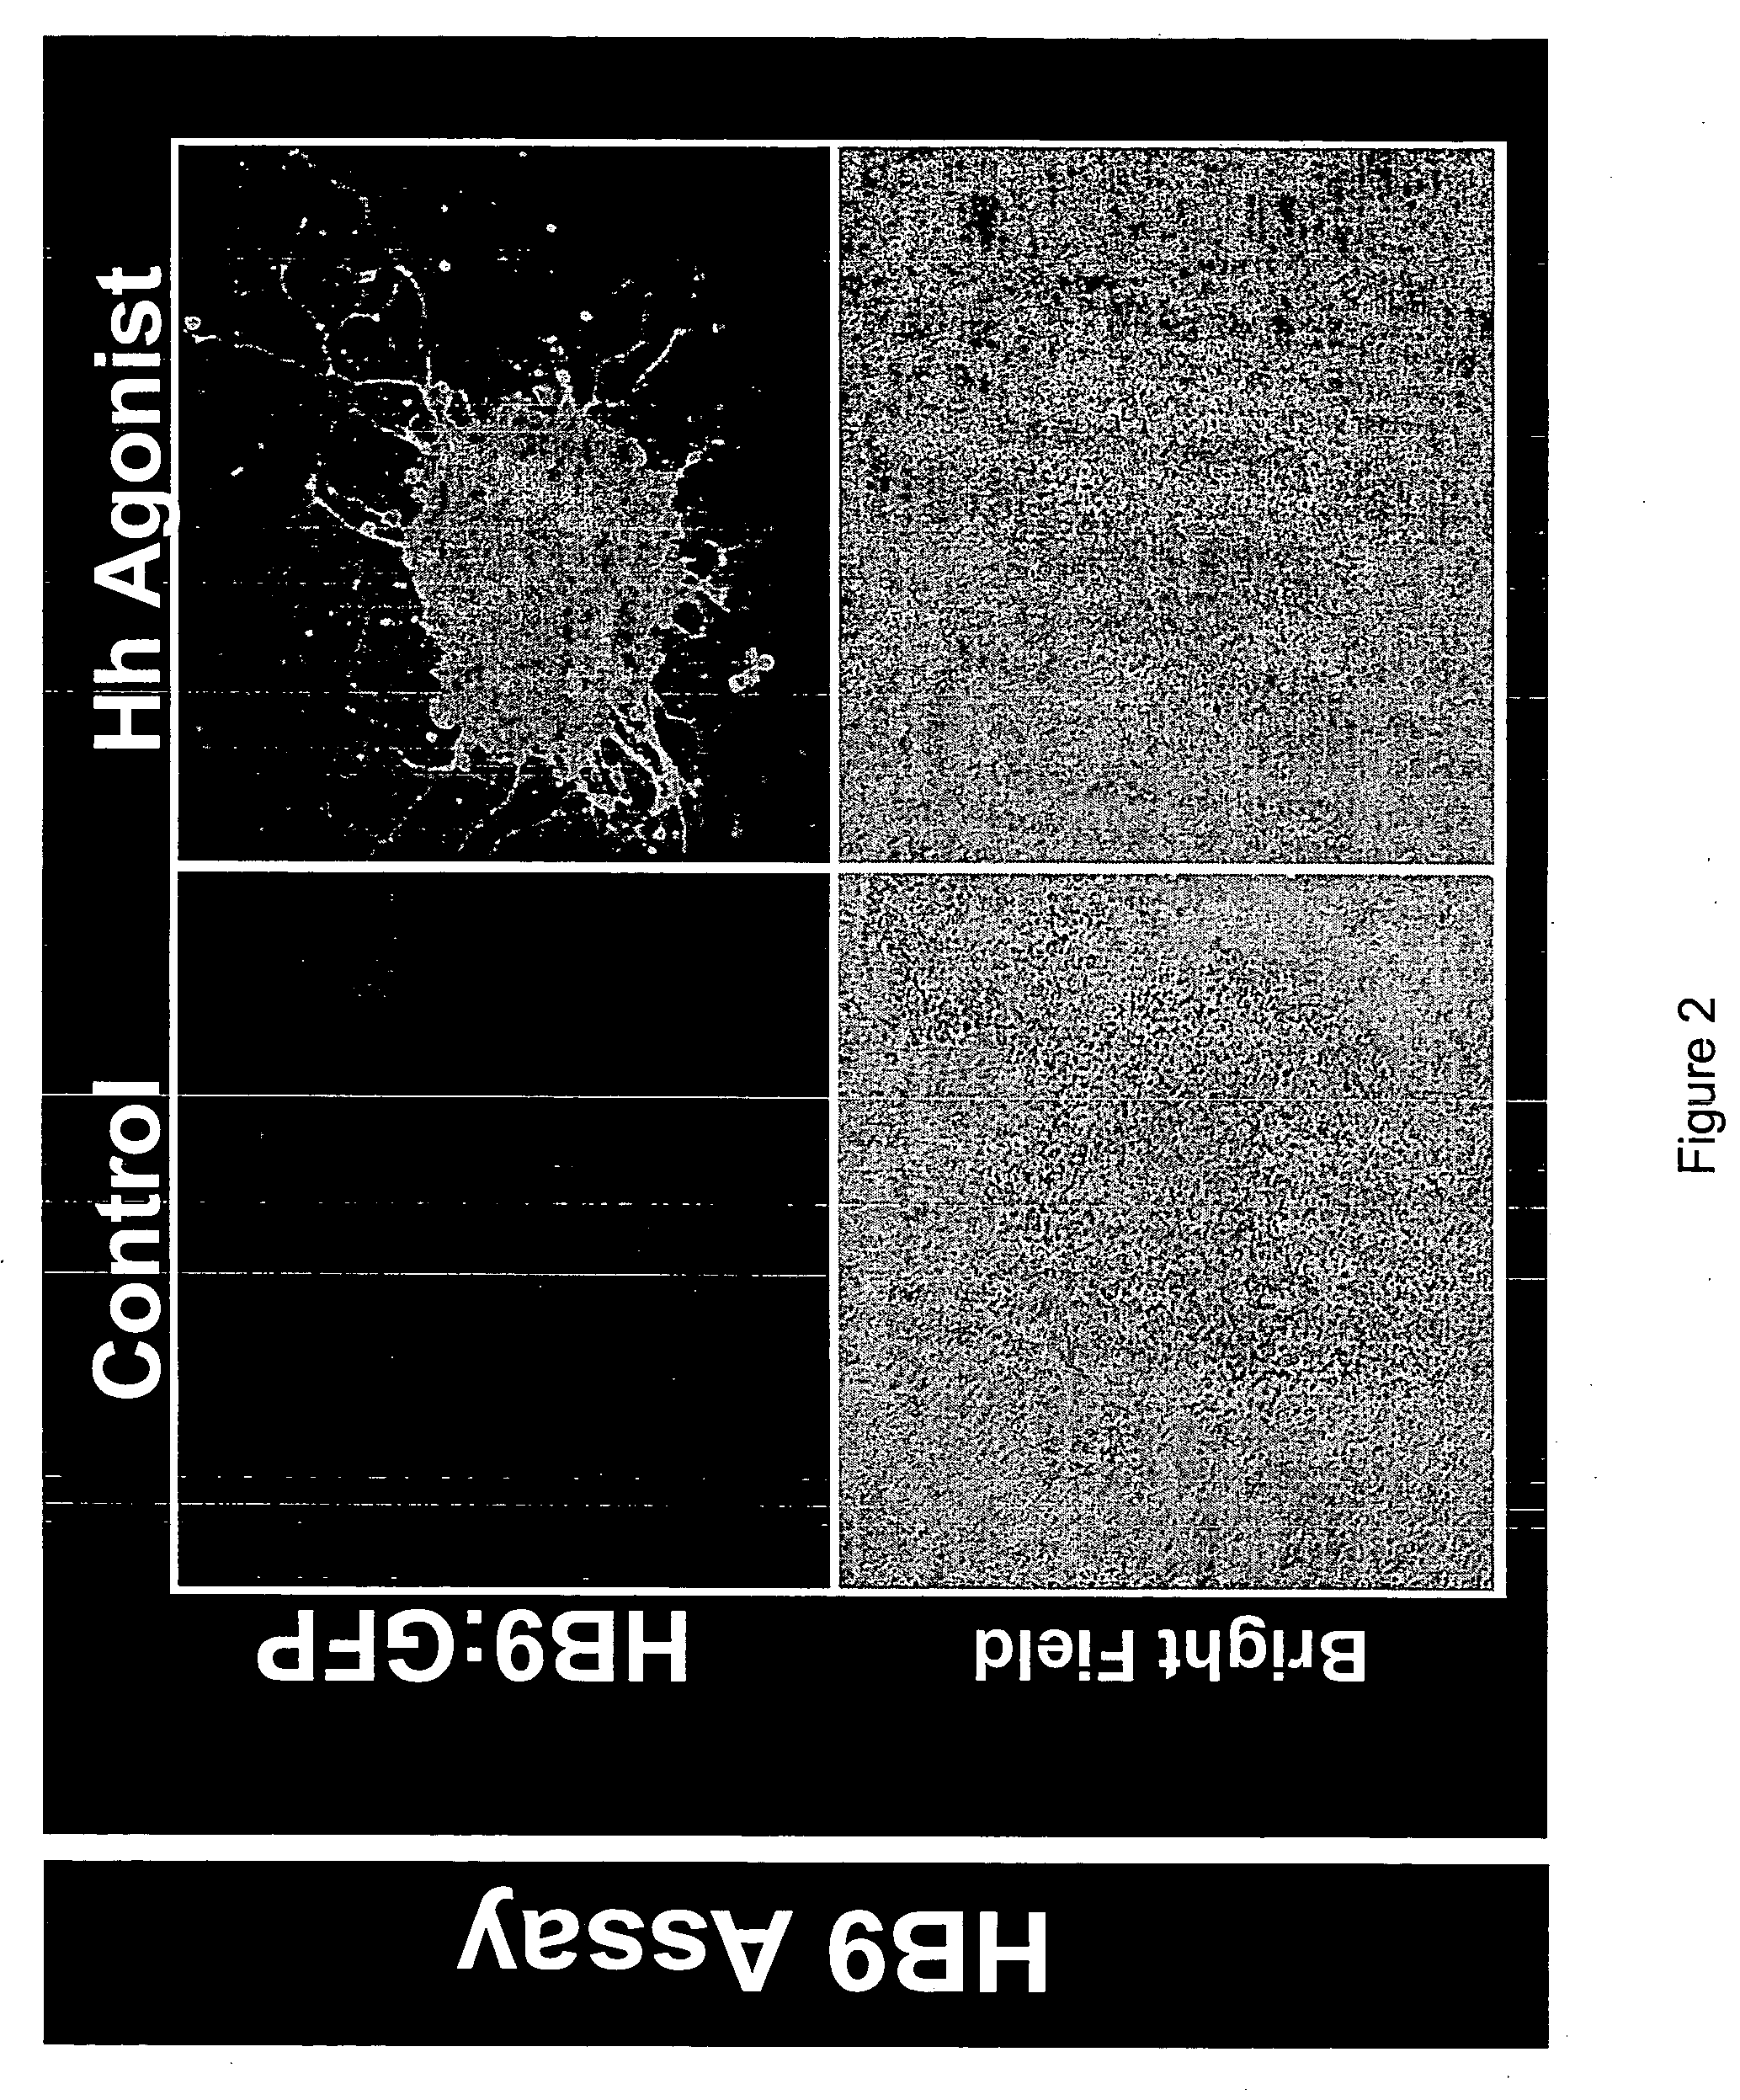 Stem cell-based methods for identifying and characterizing agents